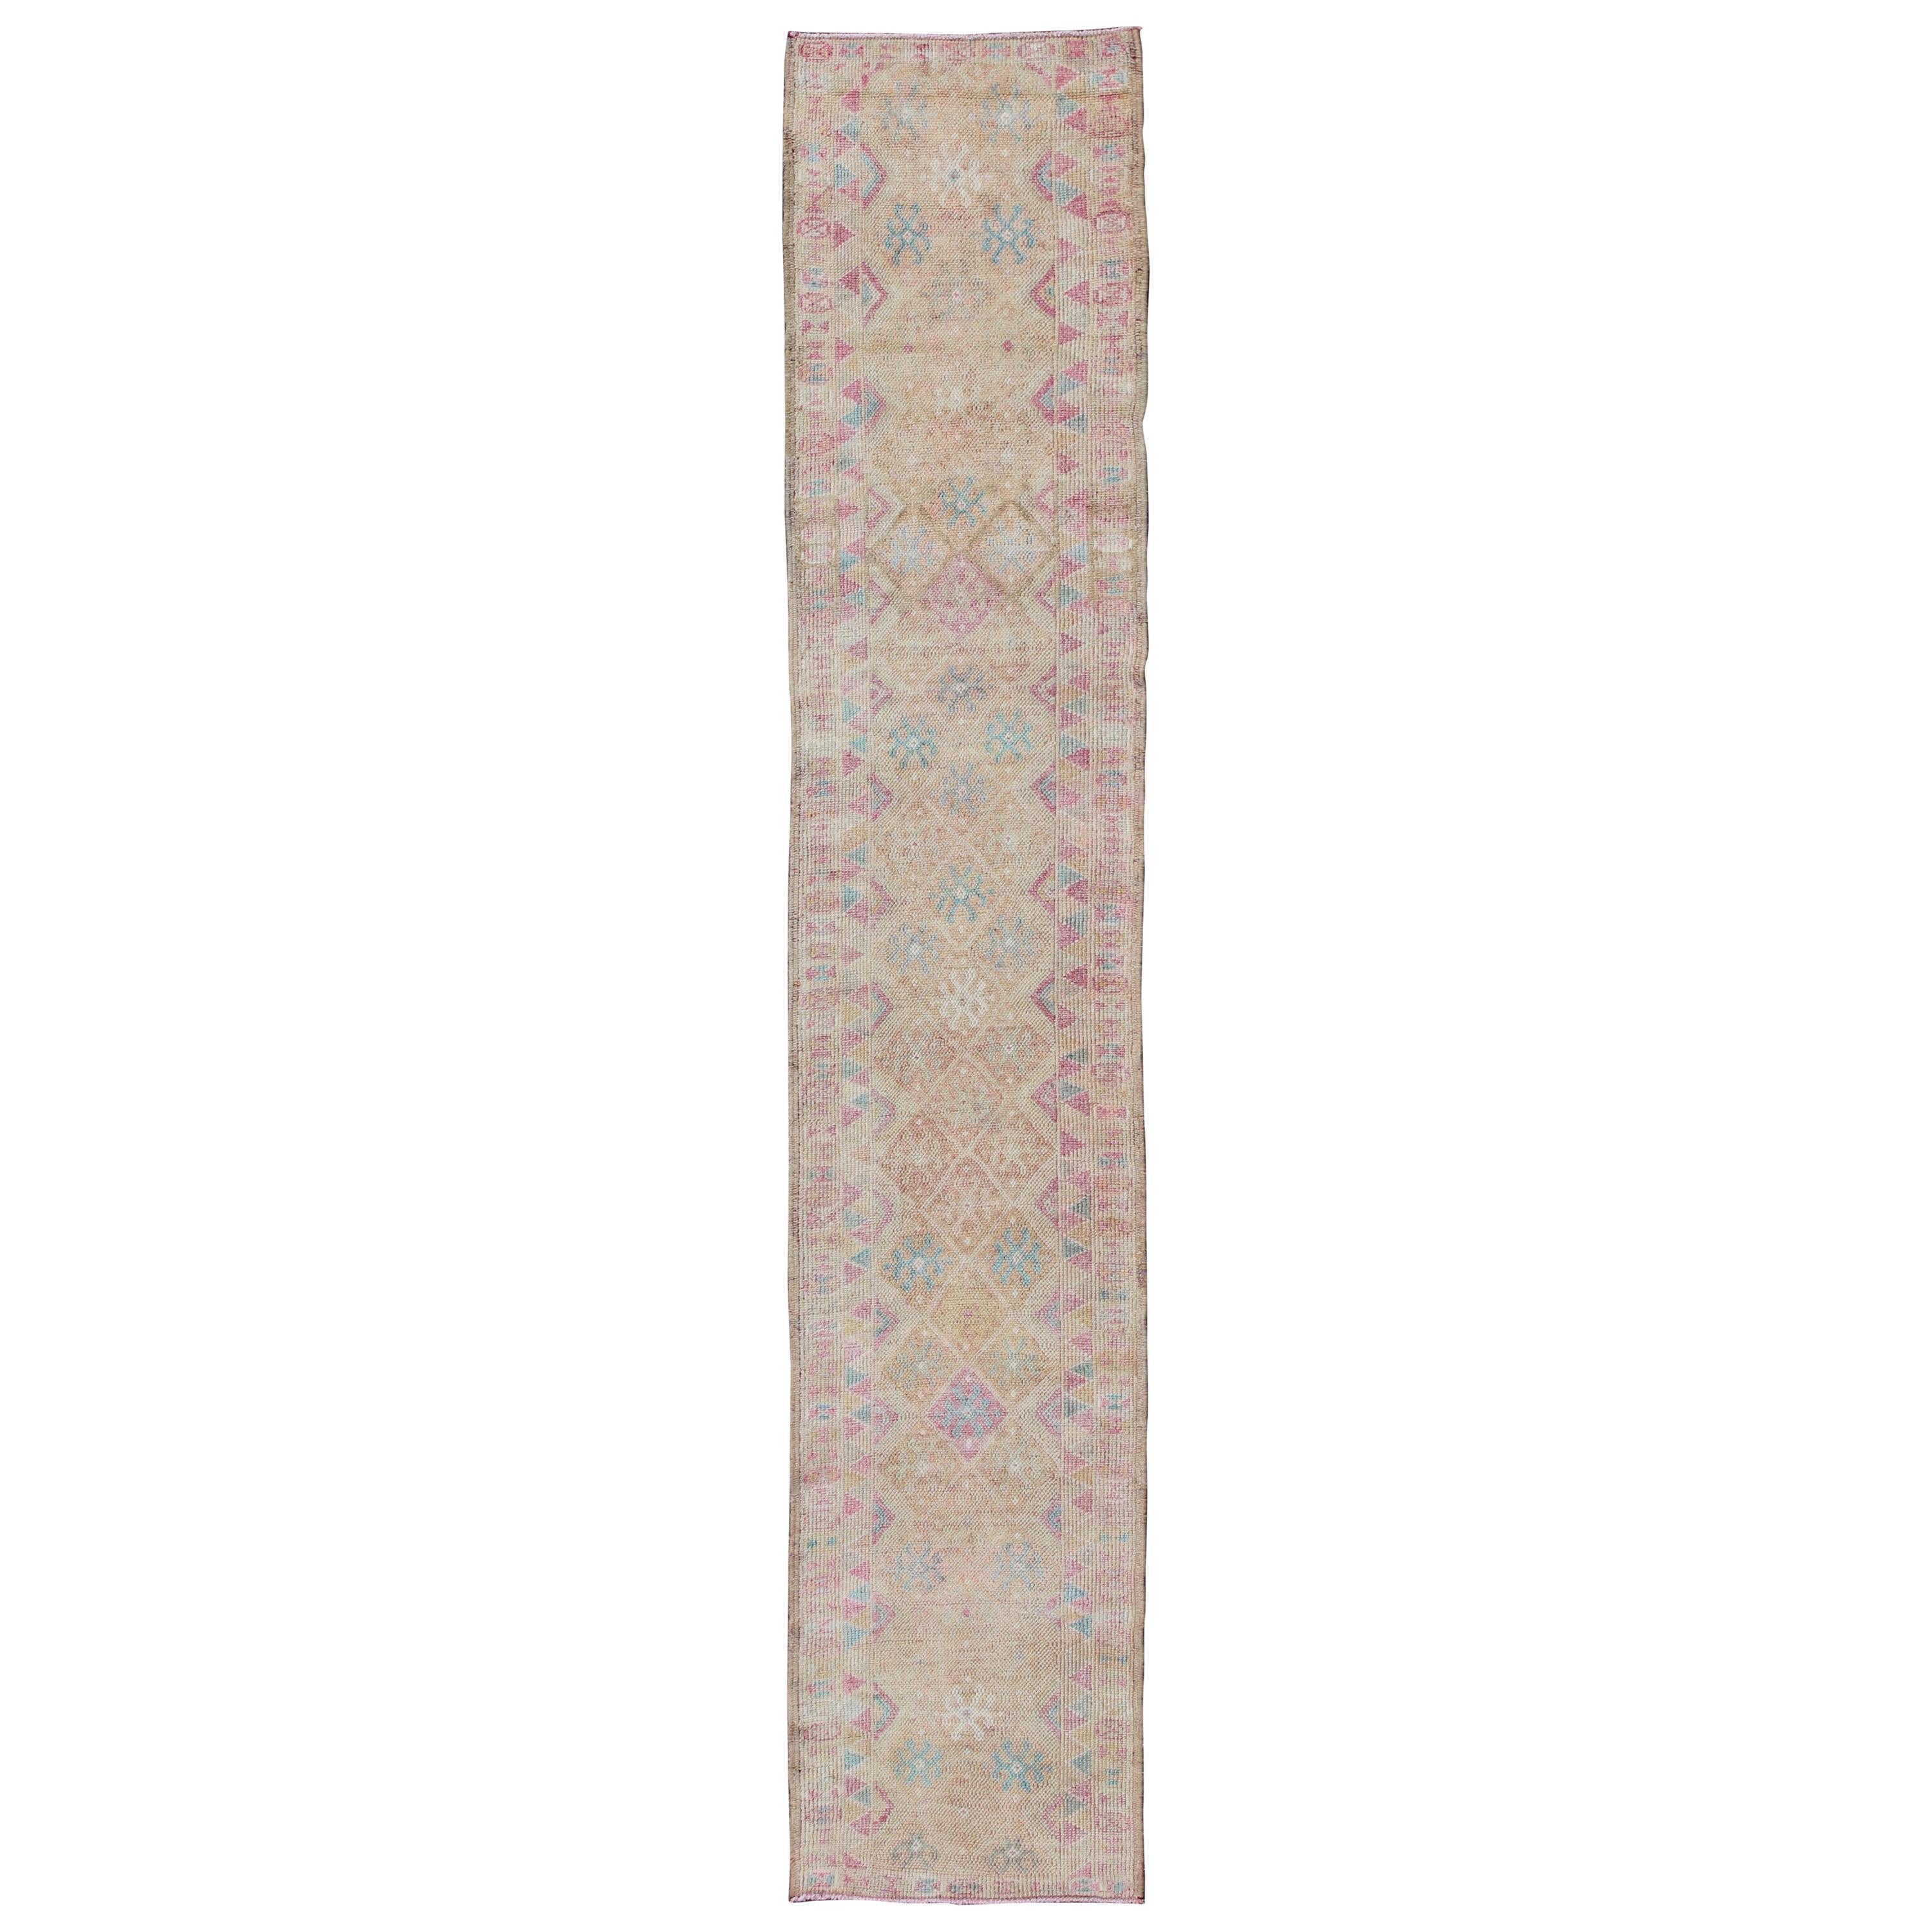 Long Vintage Turkish Runner with Geometric Design in Light Purple and Gold